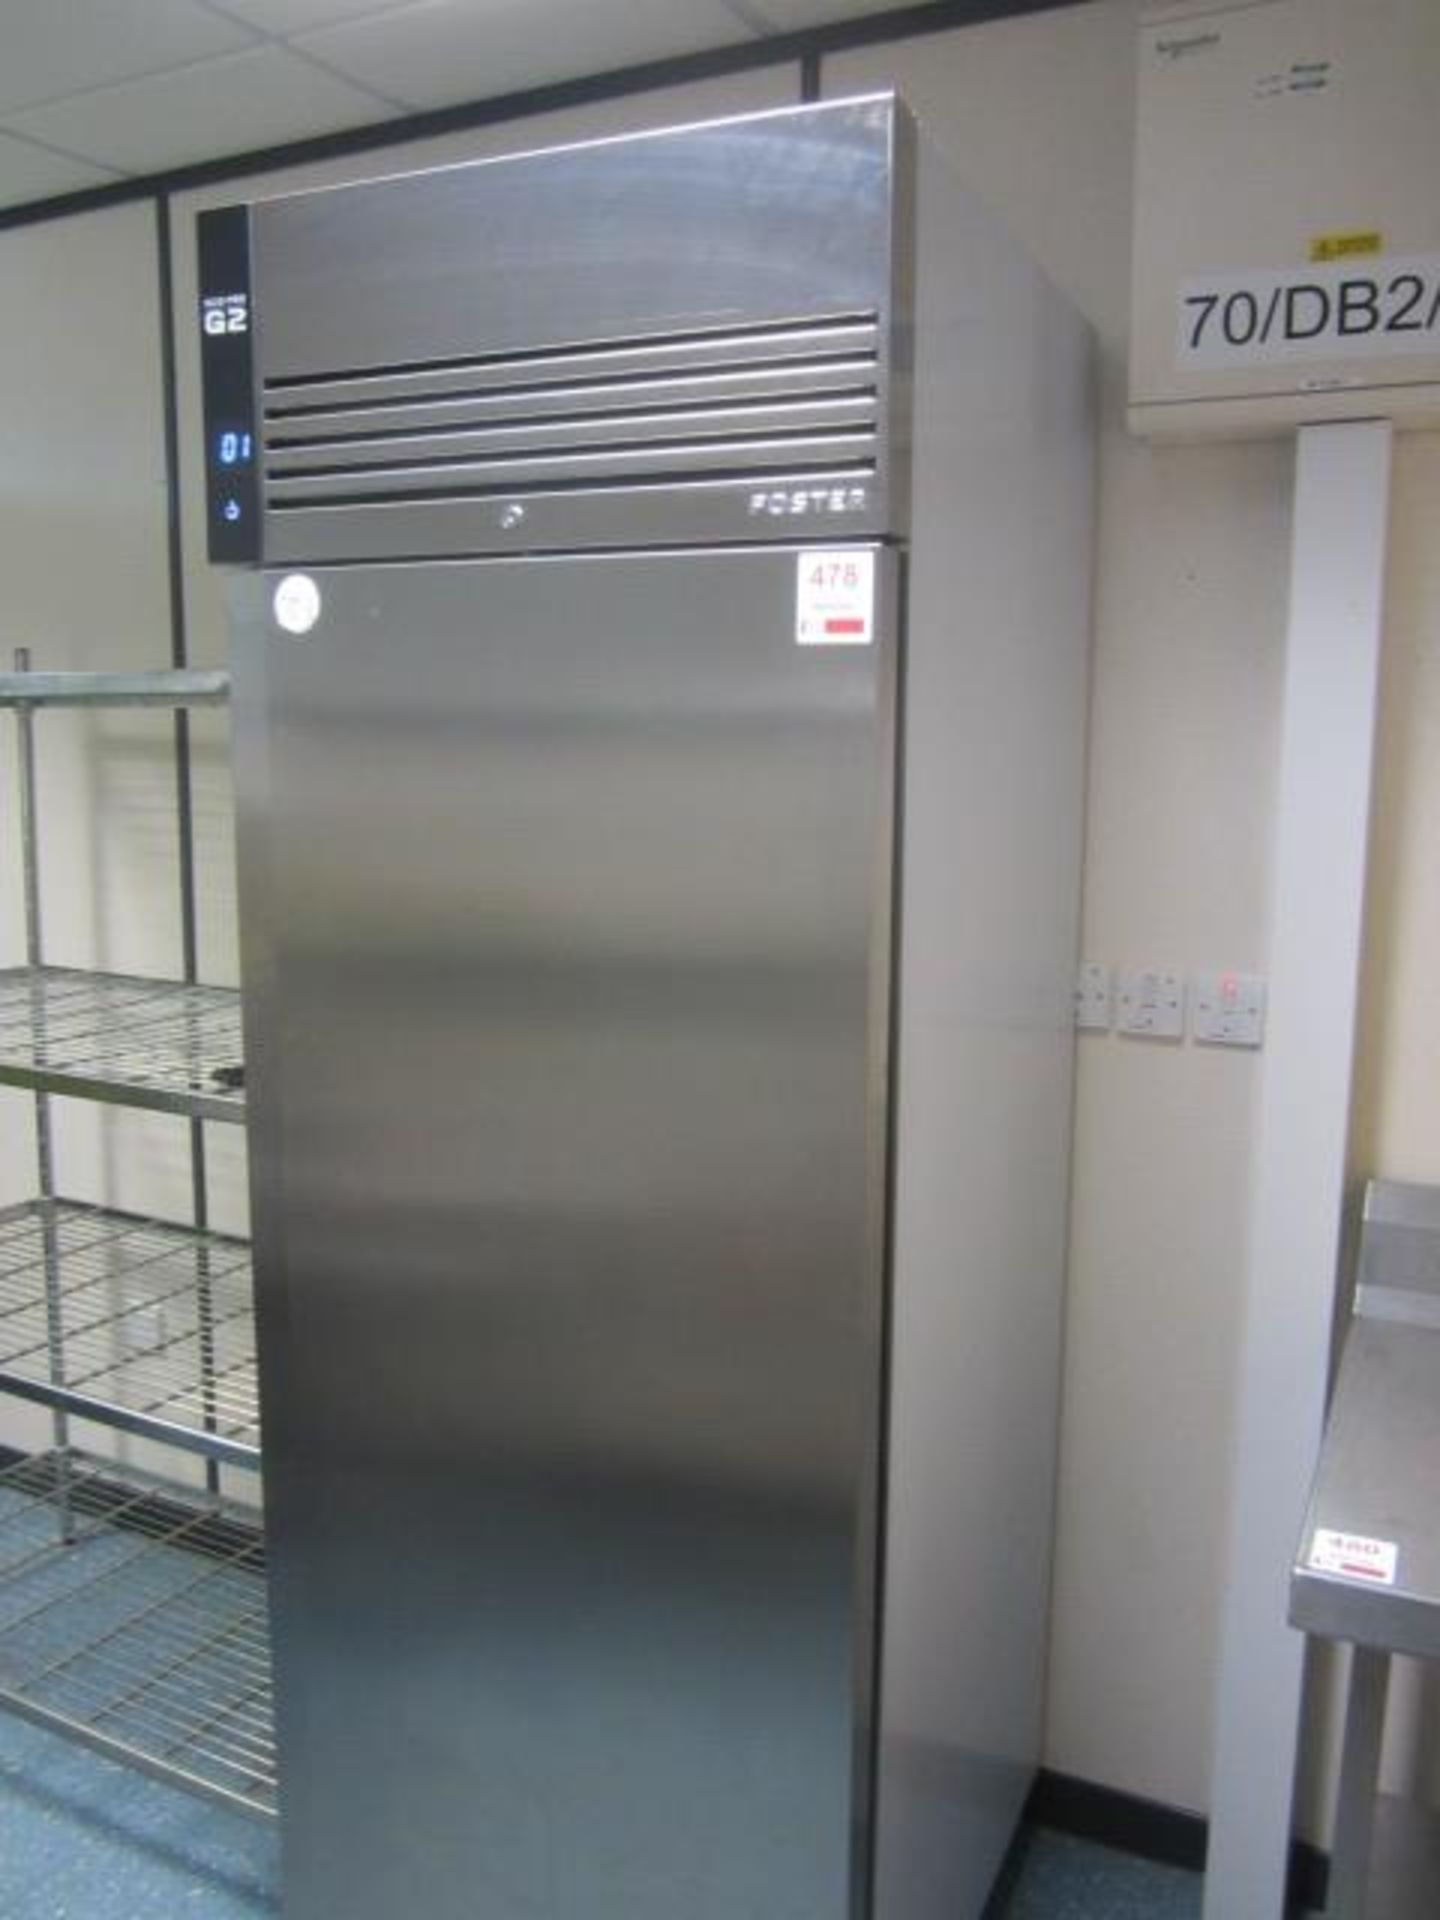 Foster Eco Pro G2 stainless steel single door commercial fridge, model EP700W, serial no.